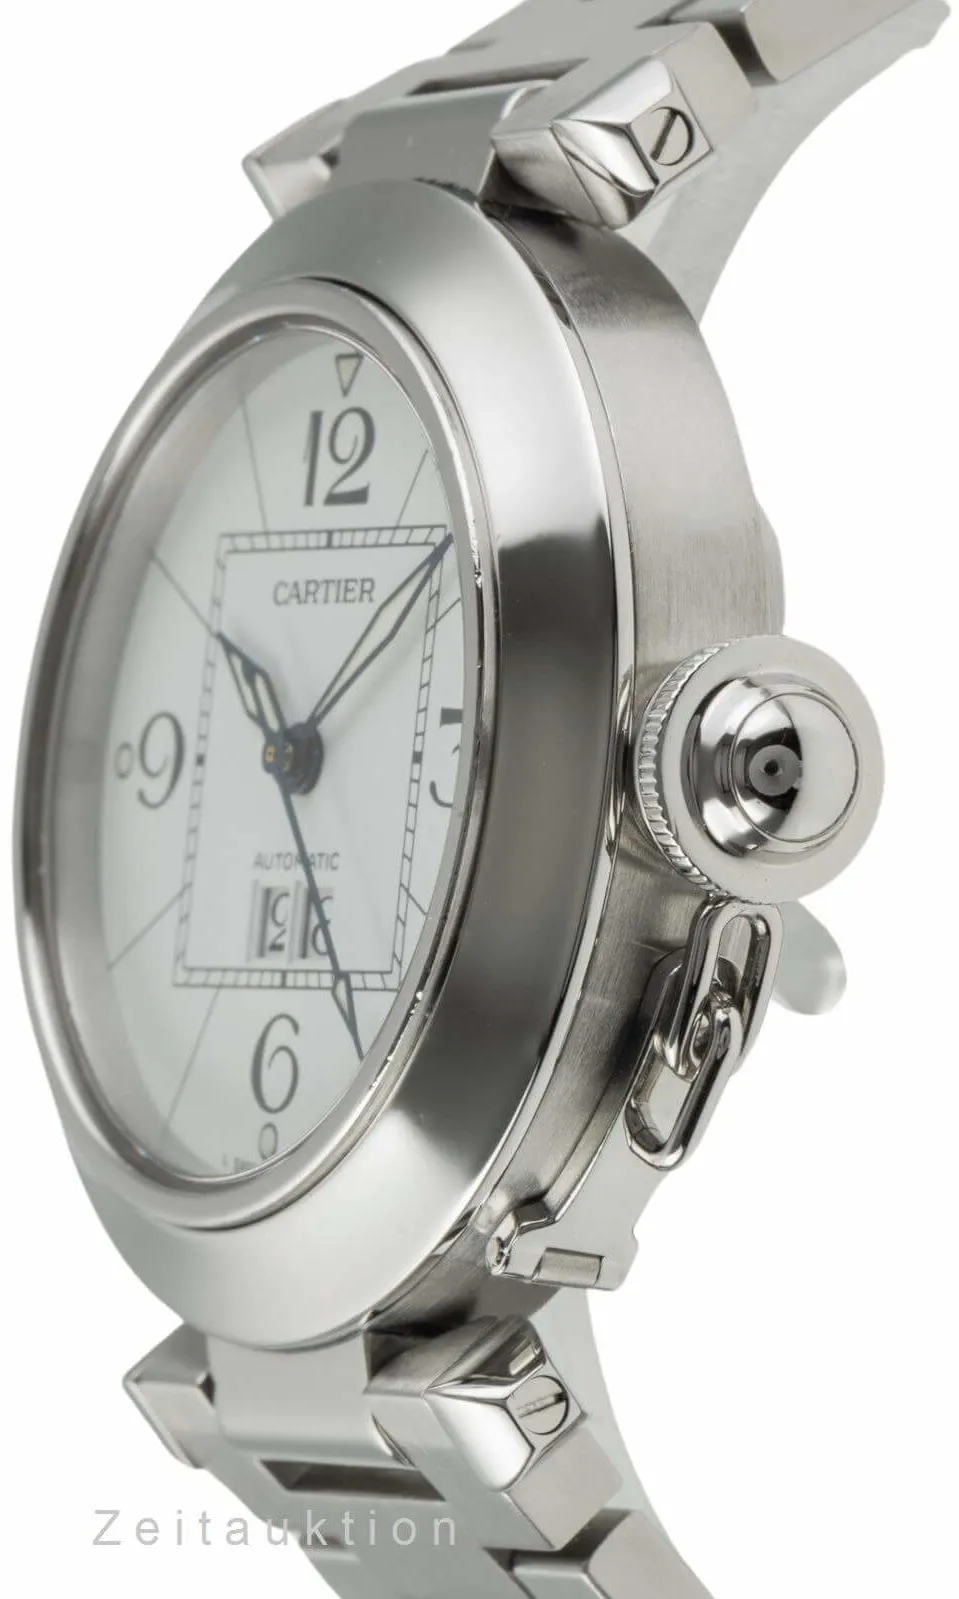 Cartier Pasha 35.5mm Stainless steel White 5